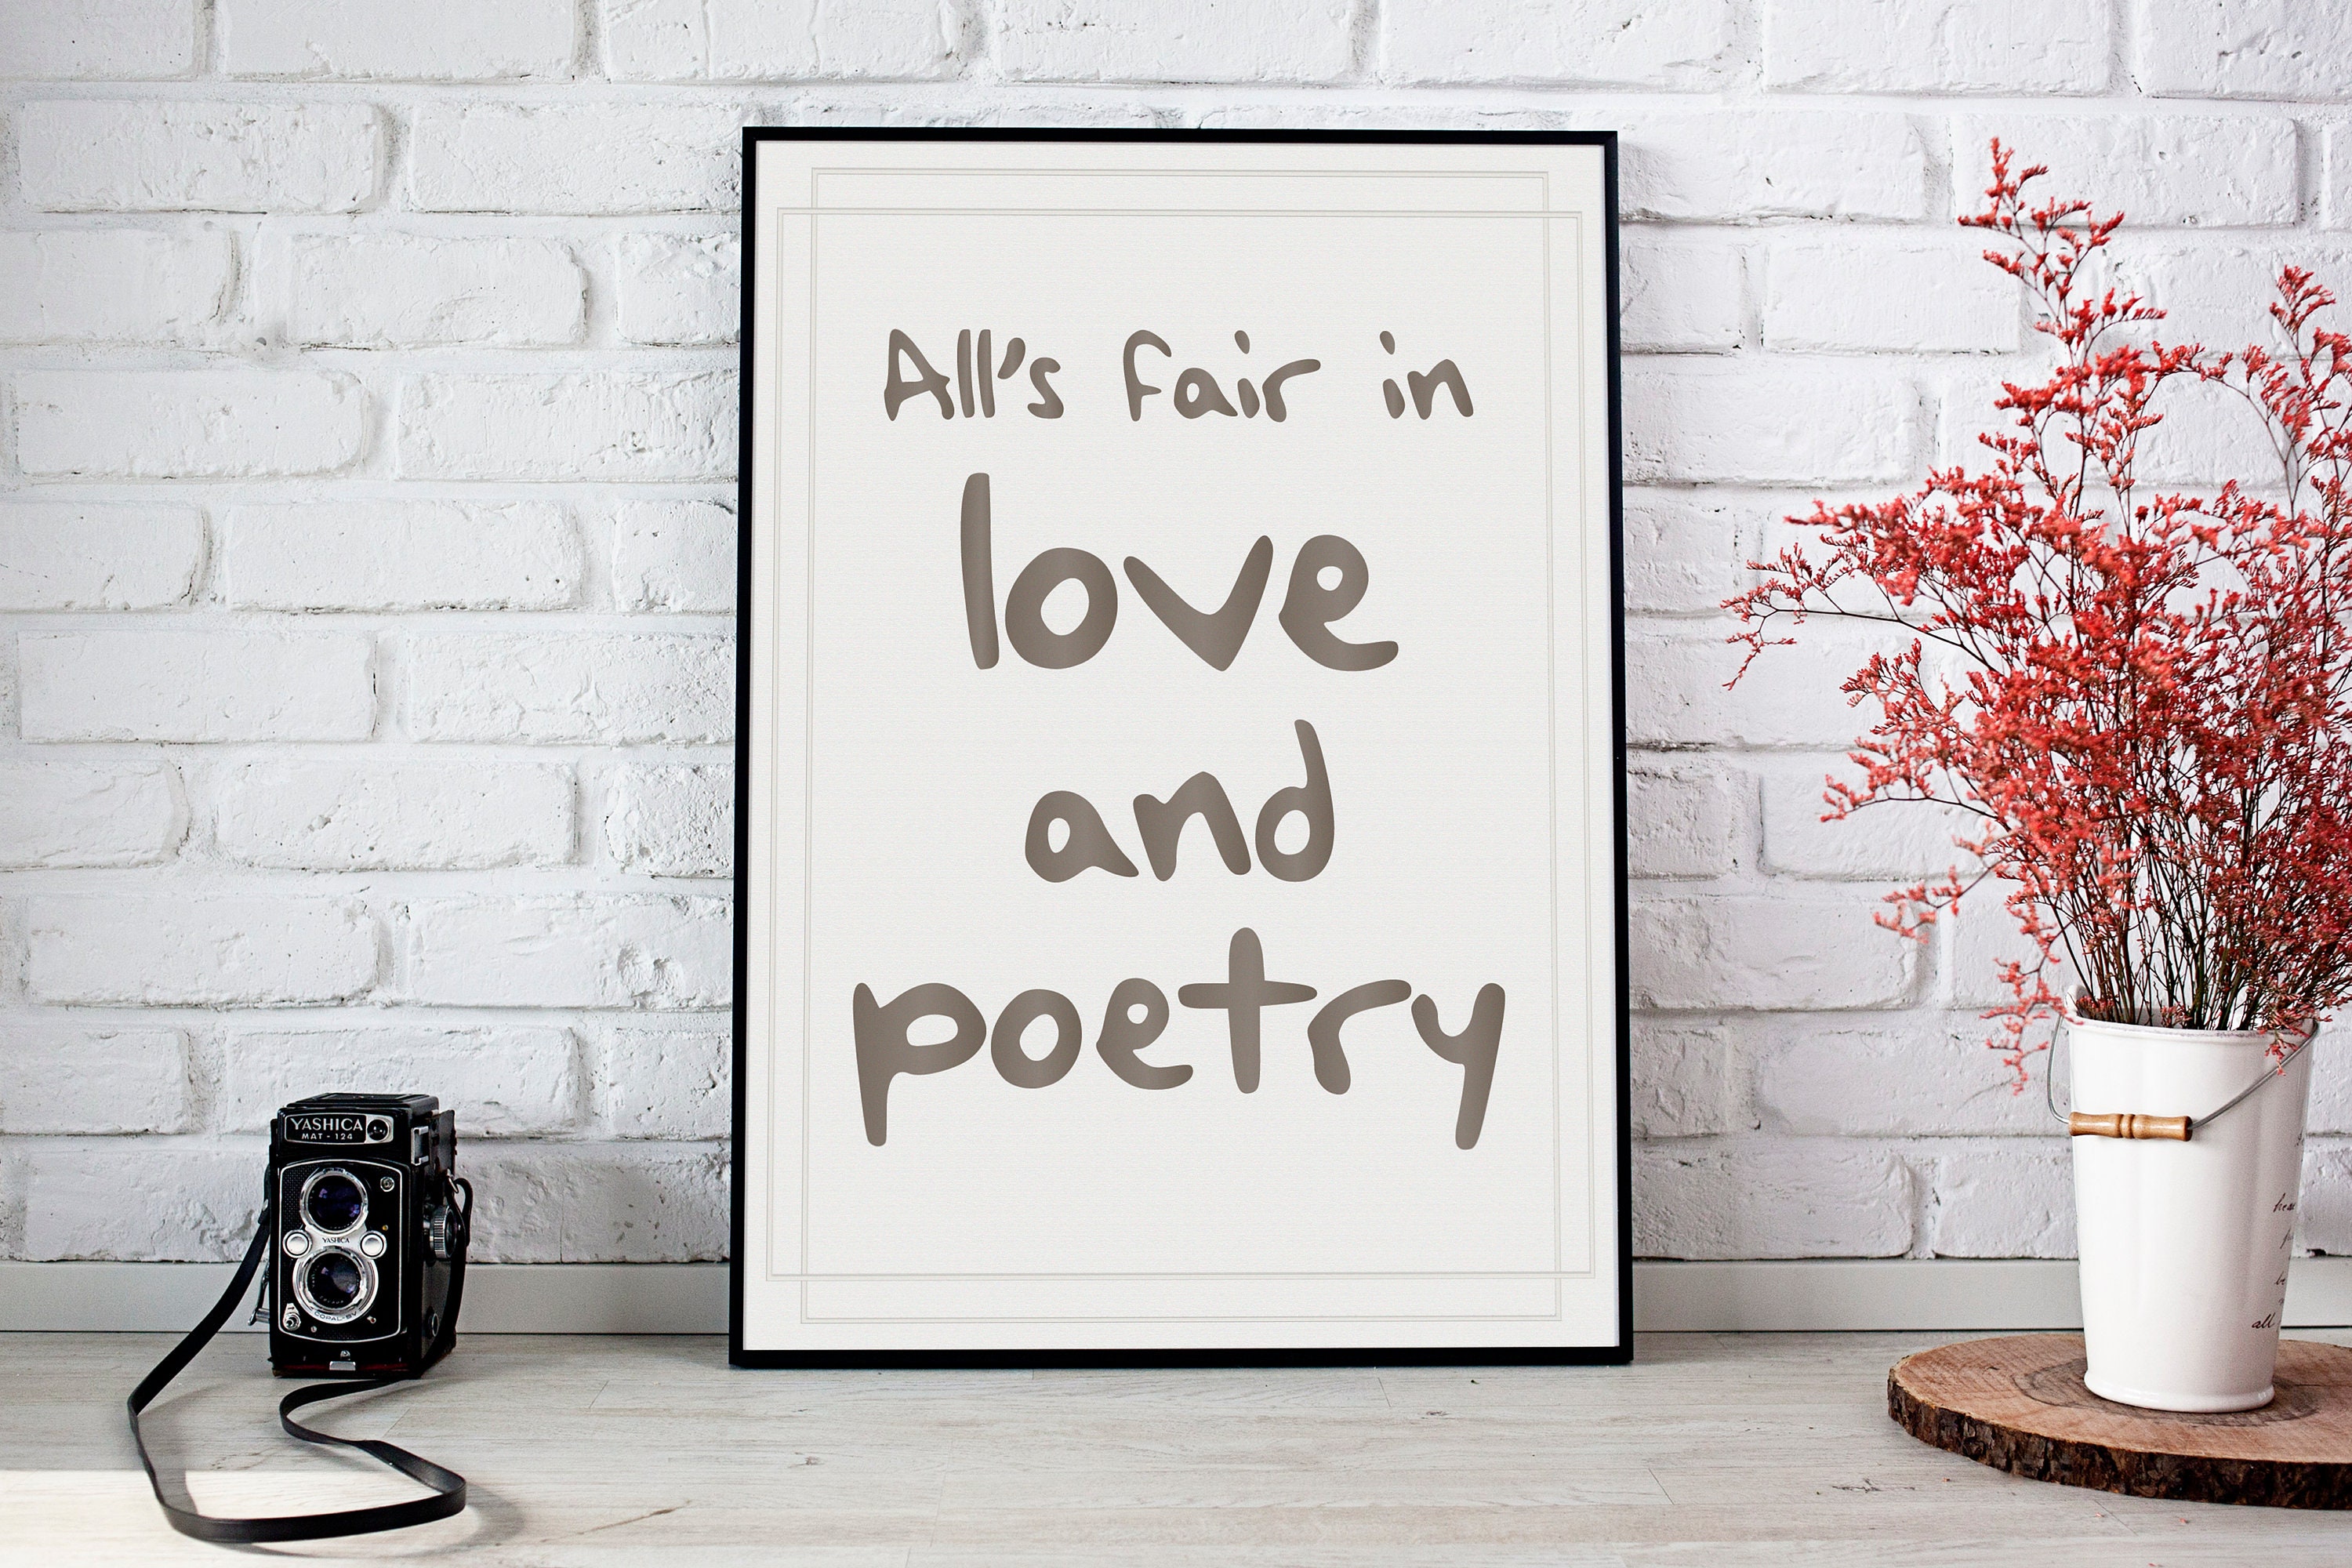 Discover The Tortured Poets Department, Taylor, All's Fair in Love and Poetry, Digital Print